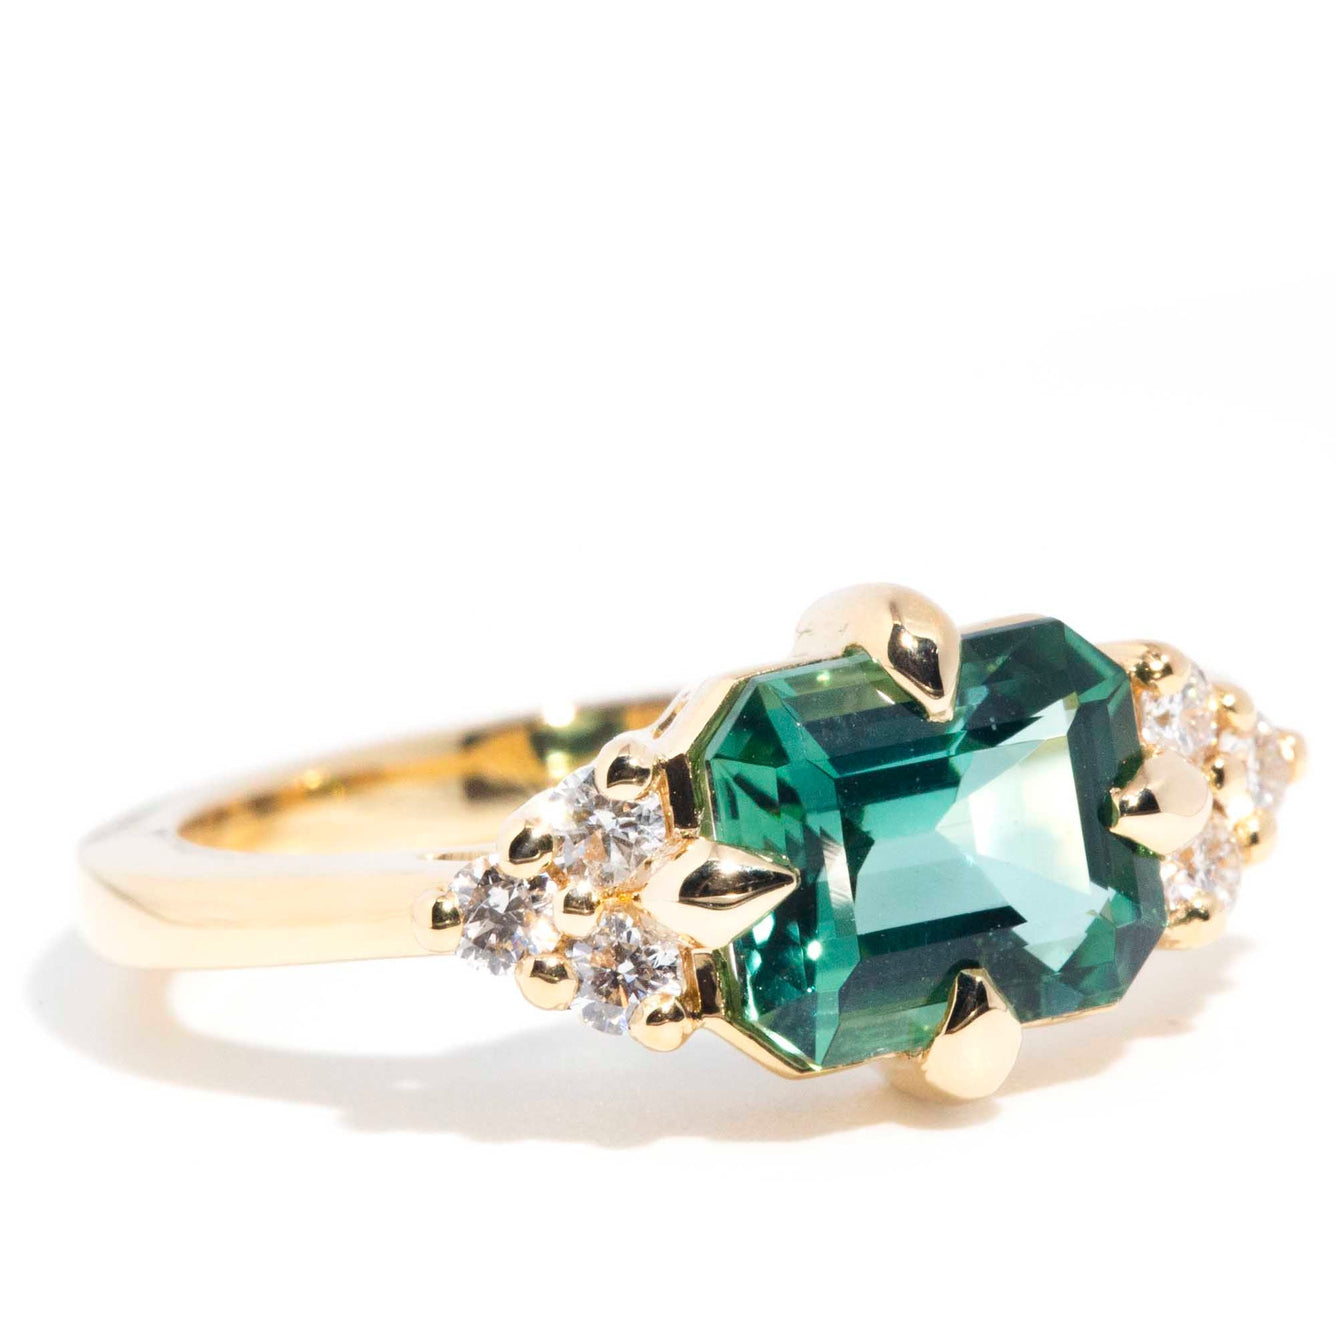 Angelita 2.05ct Teal Tourmaline & Diamond Contemporary 18ct Gold Ring* GTG Rings Imperial Jewellery